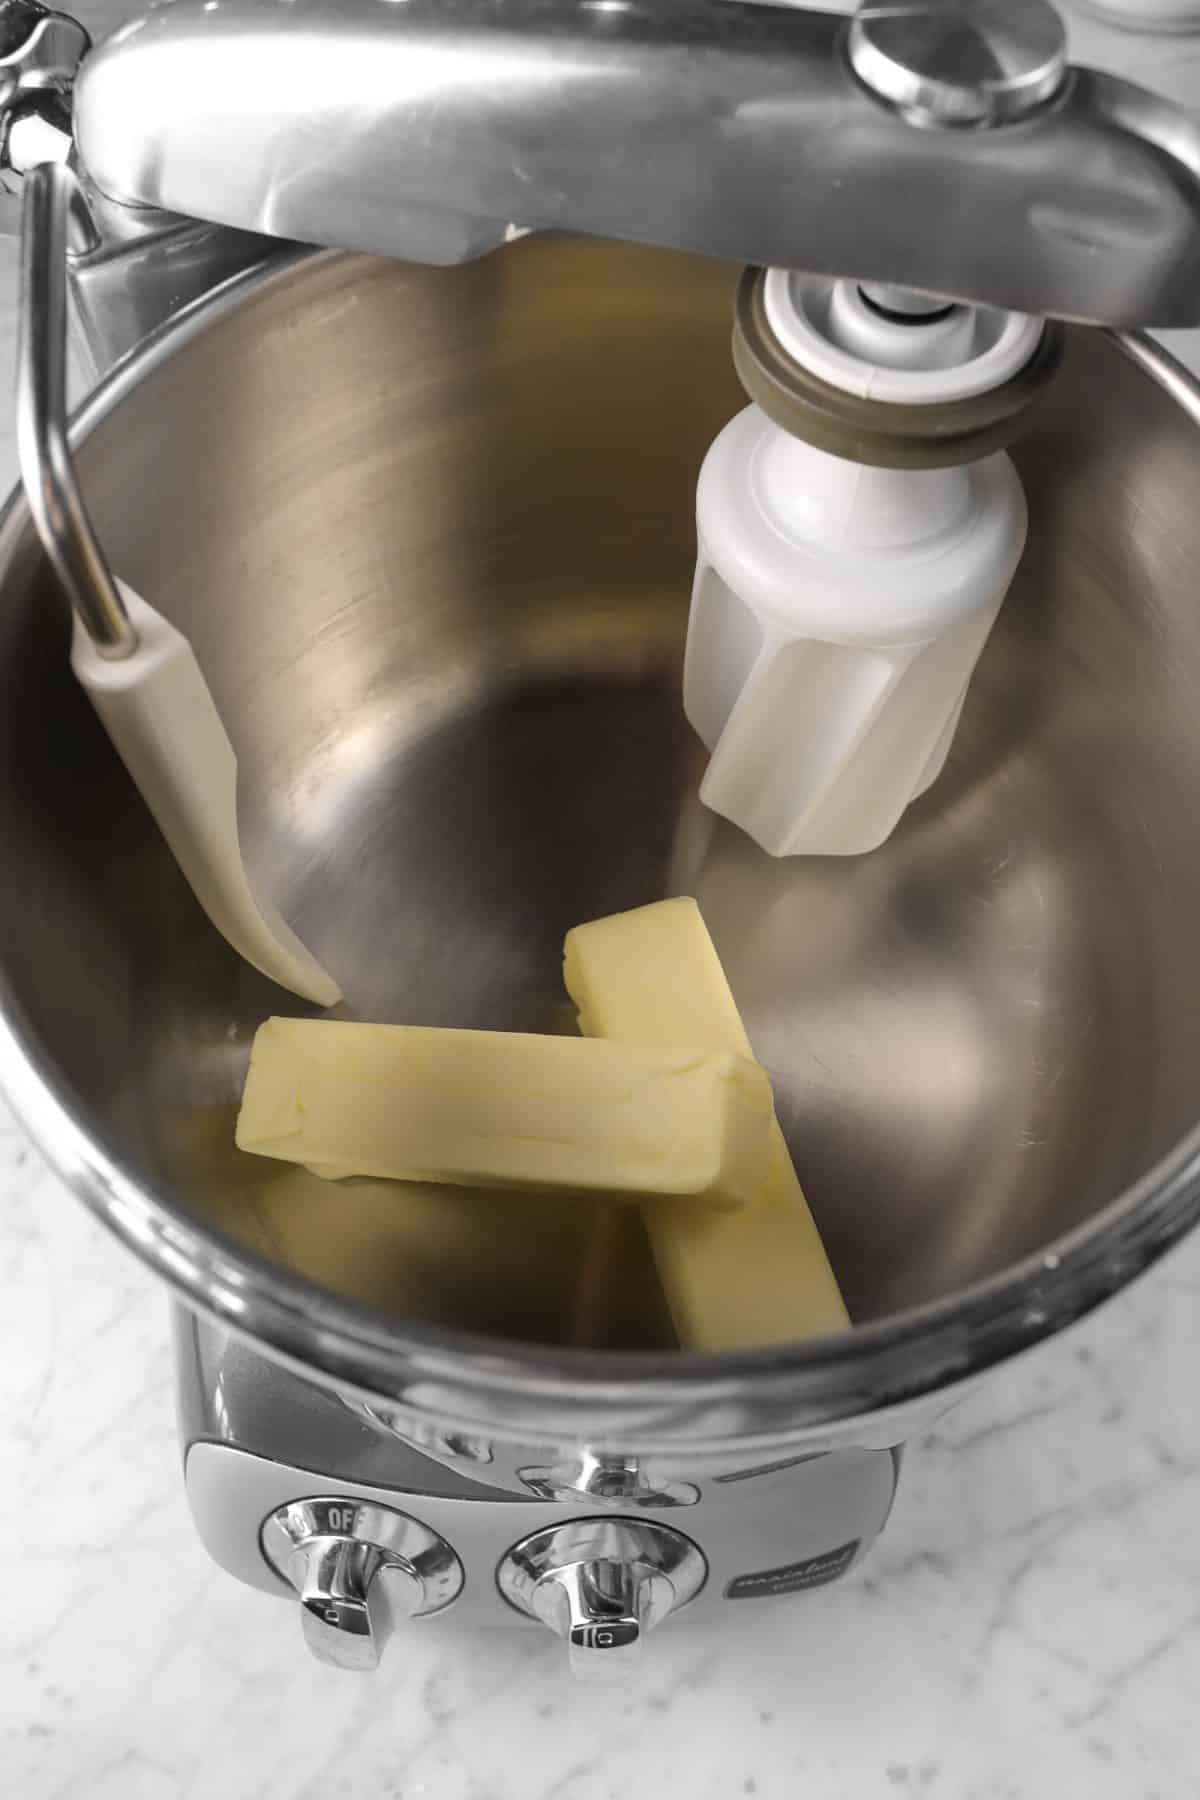 two sticks of butter in a mixer